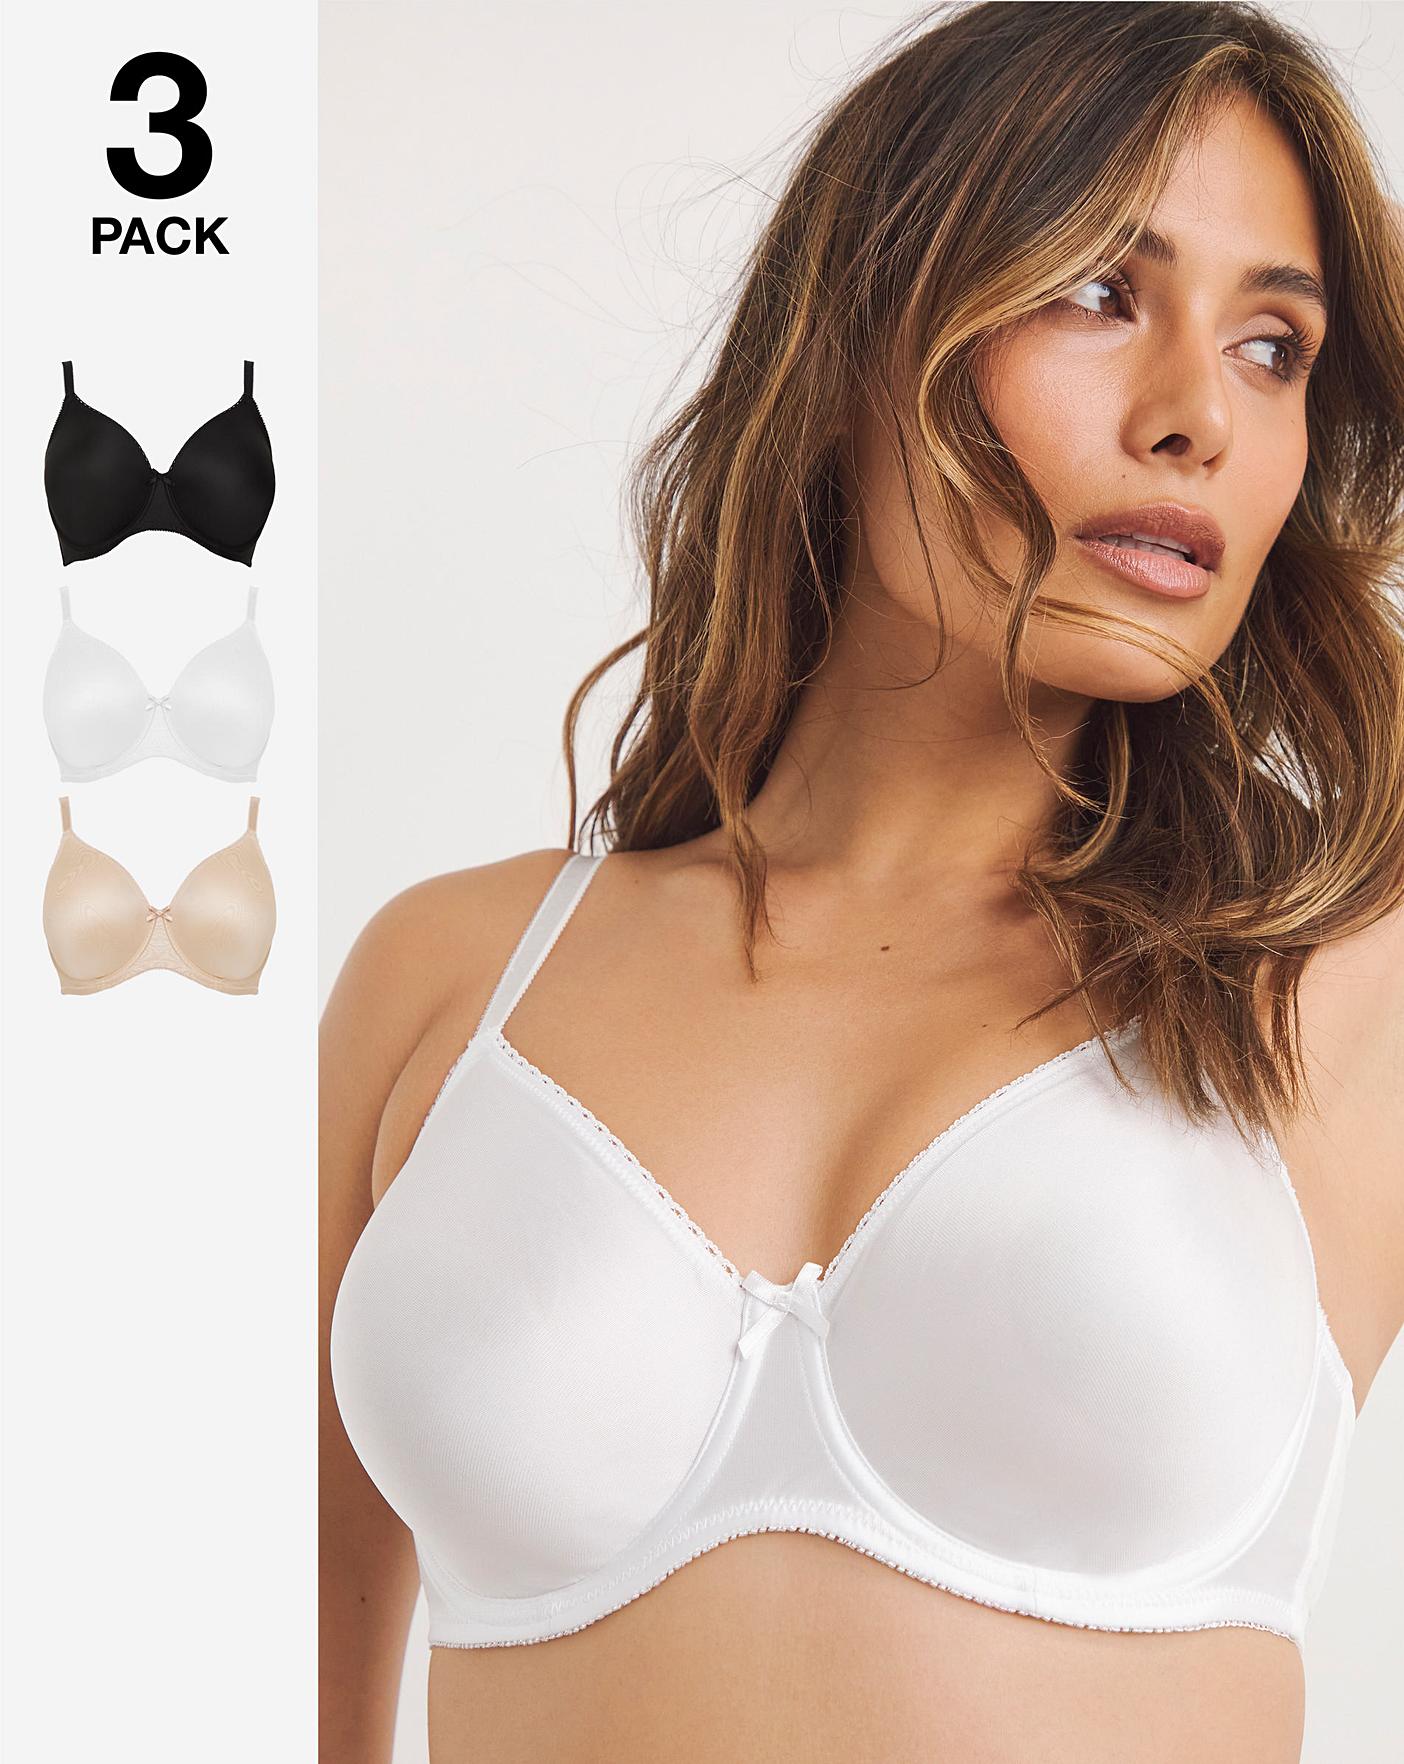 3pk Underwired Full Cup Minimiser Bras, Underwired for support